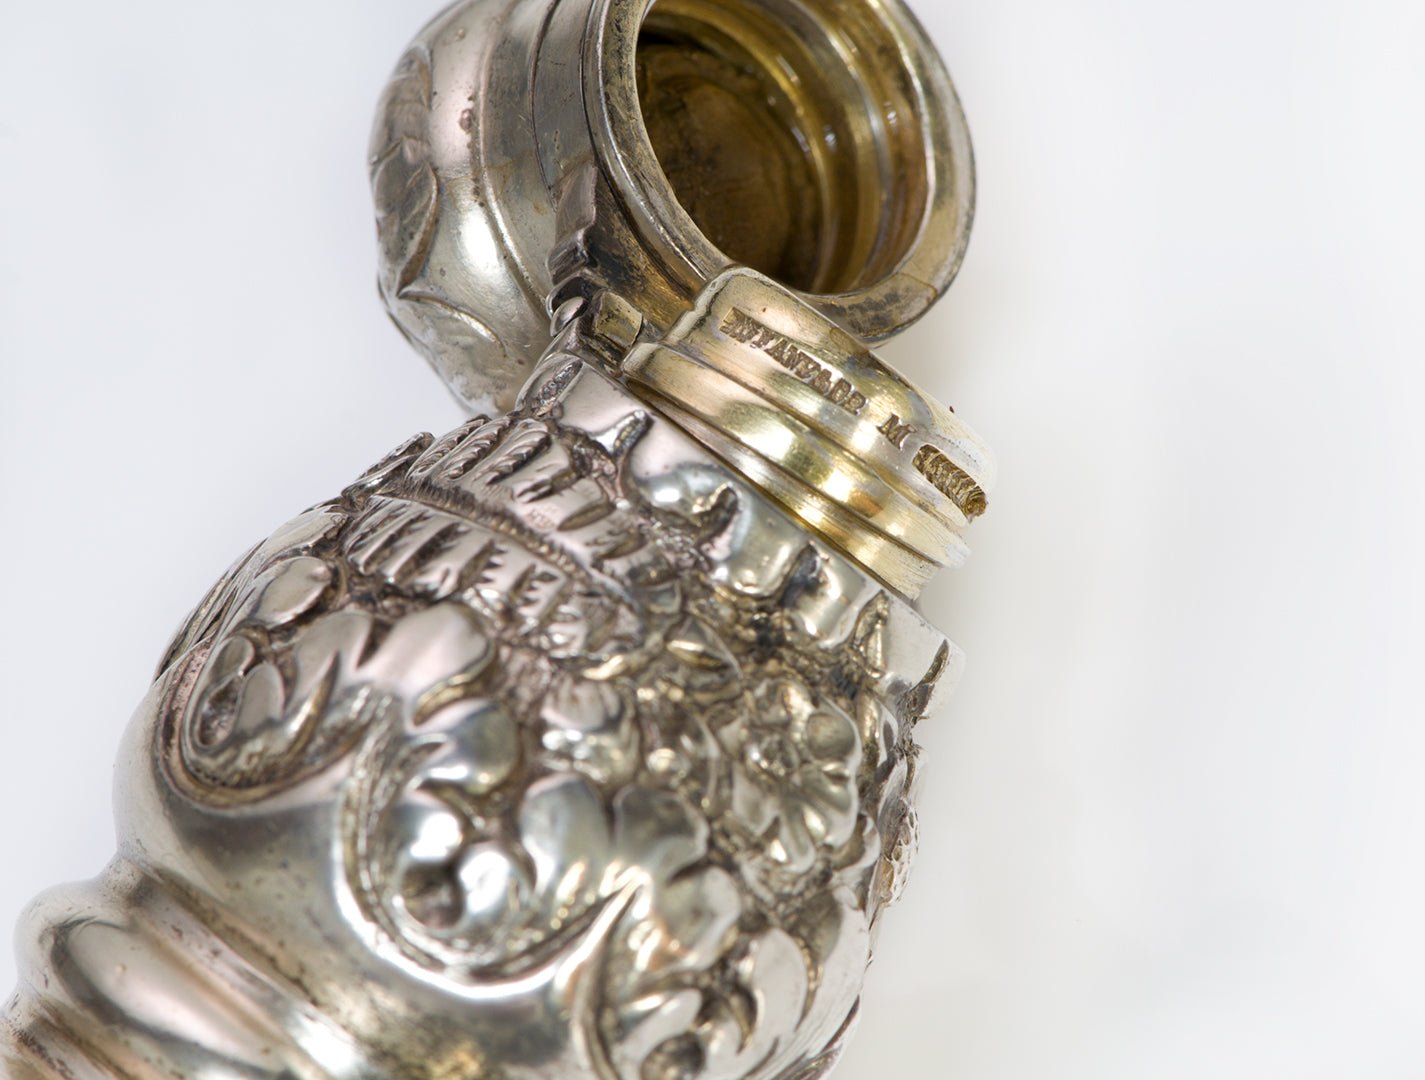 Antique Tiffany & Co. Repousse Sterling Perfume/Flask Bottle